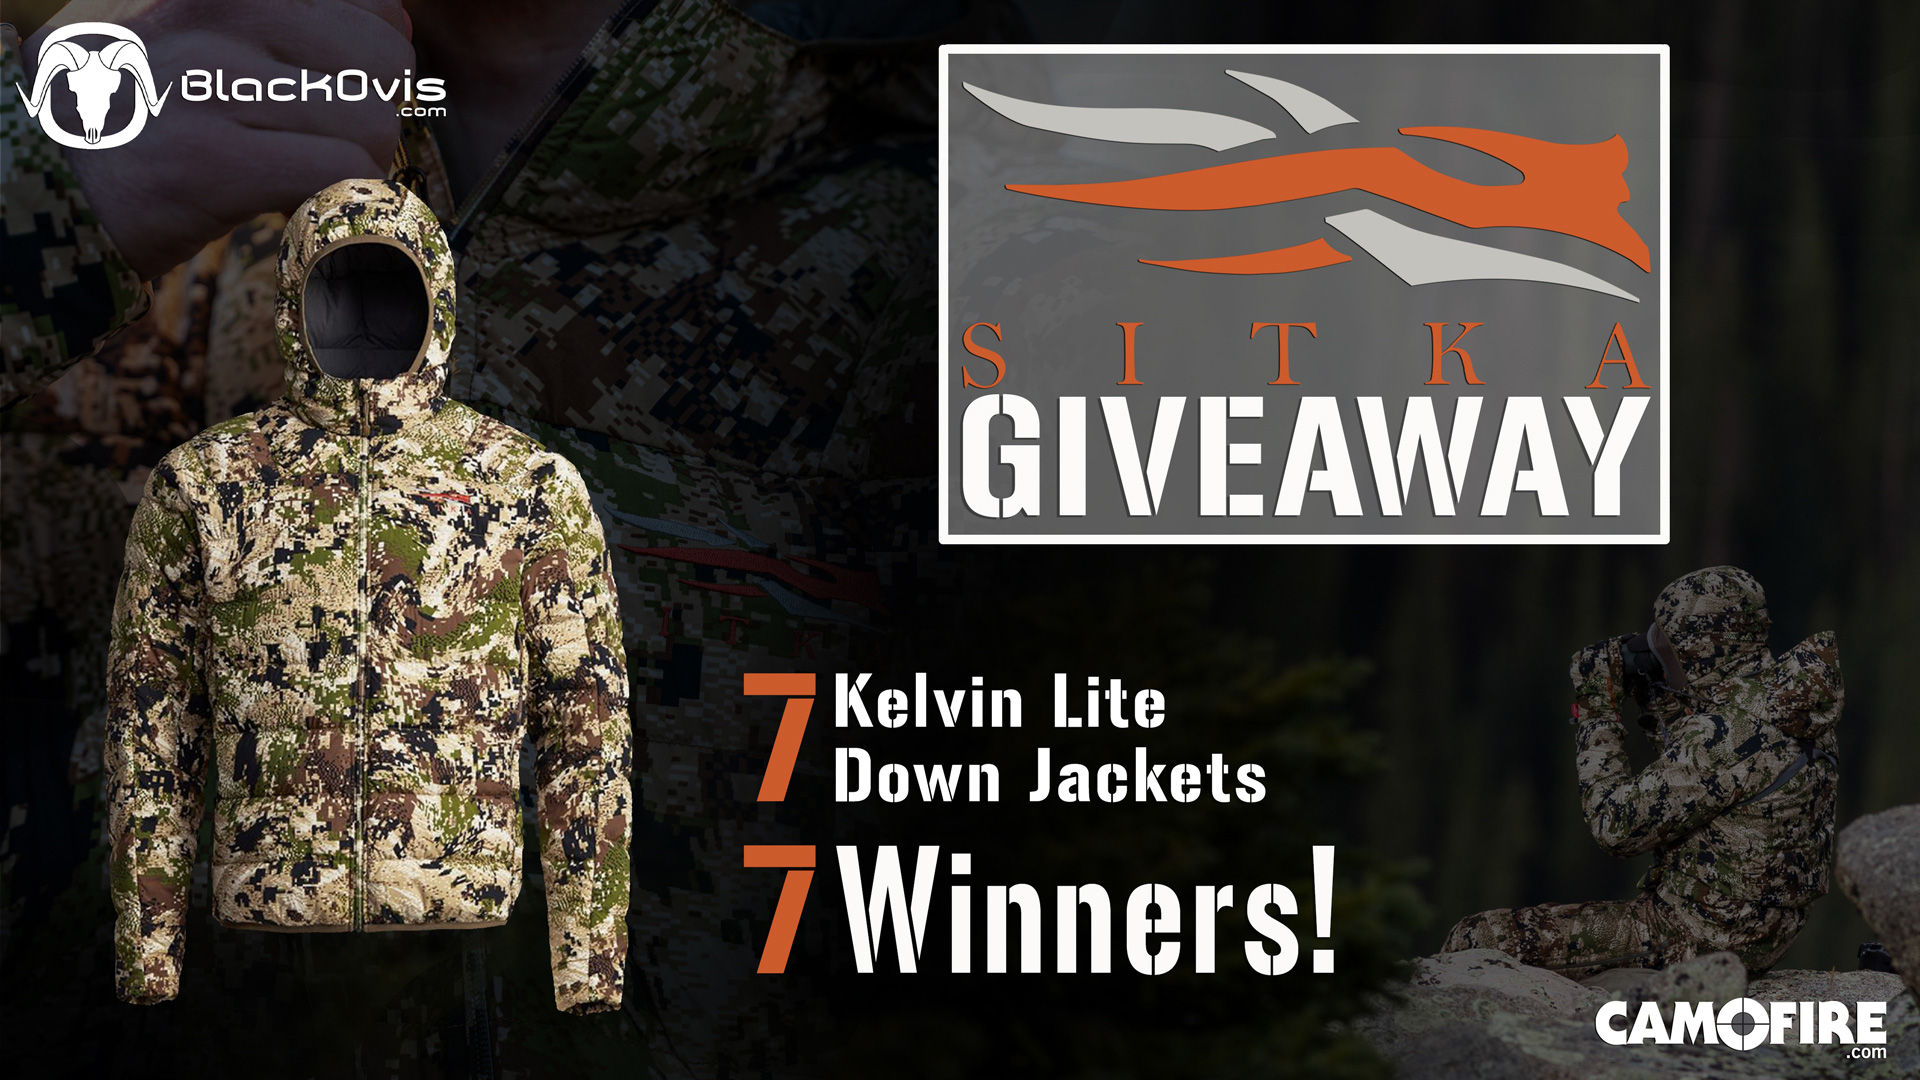 online contests, sweepstakes and giveaways - Sitka June Giveaway